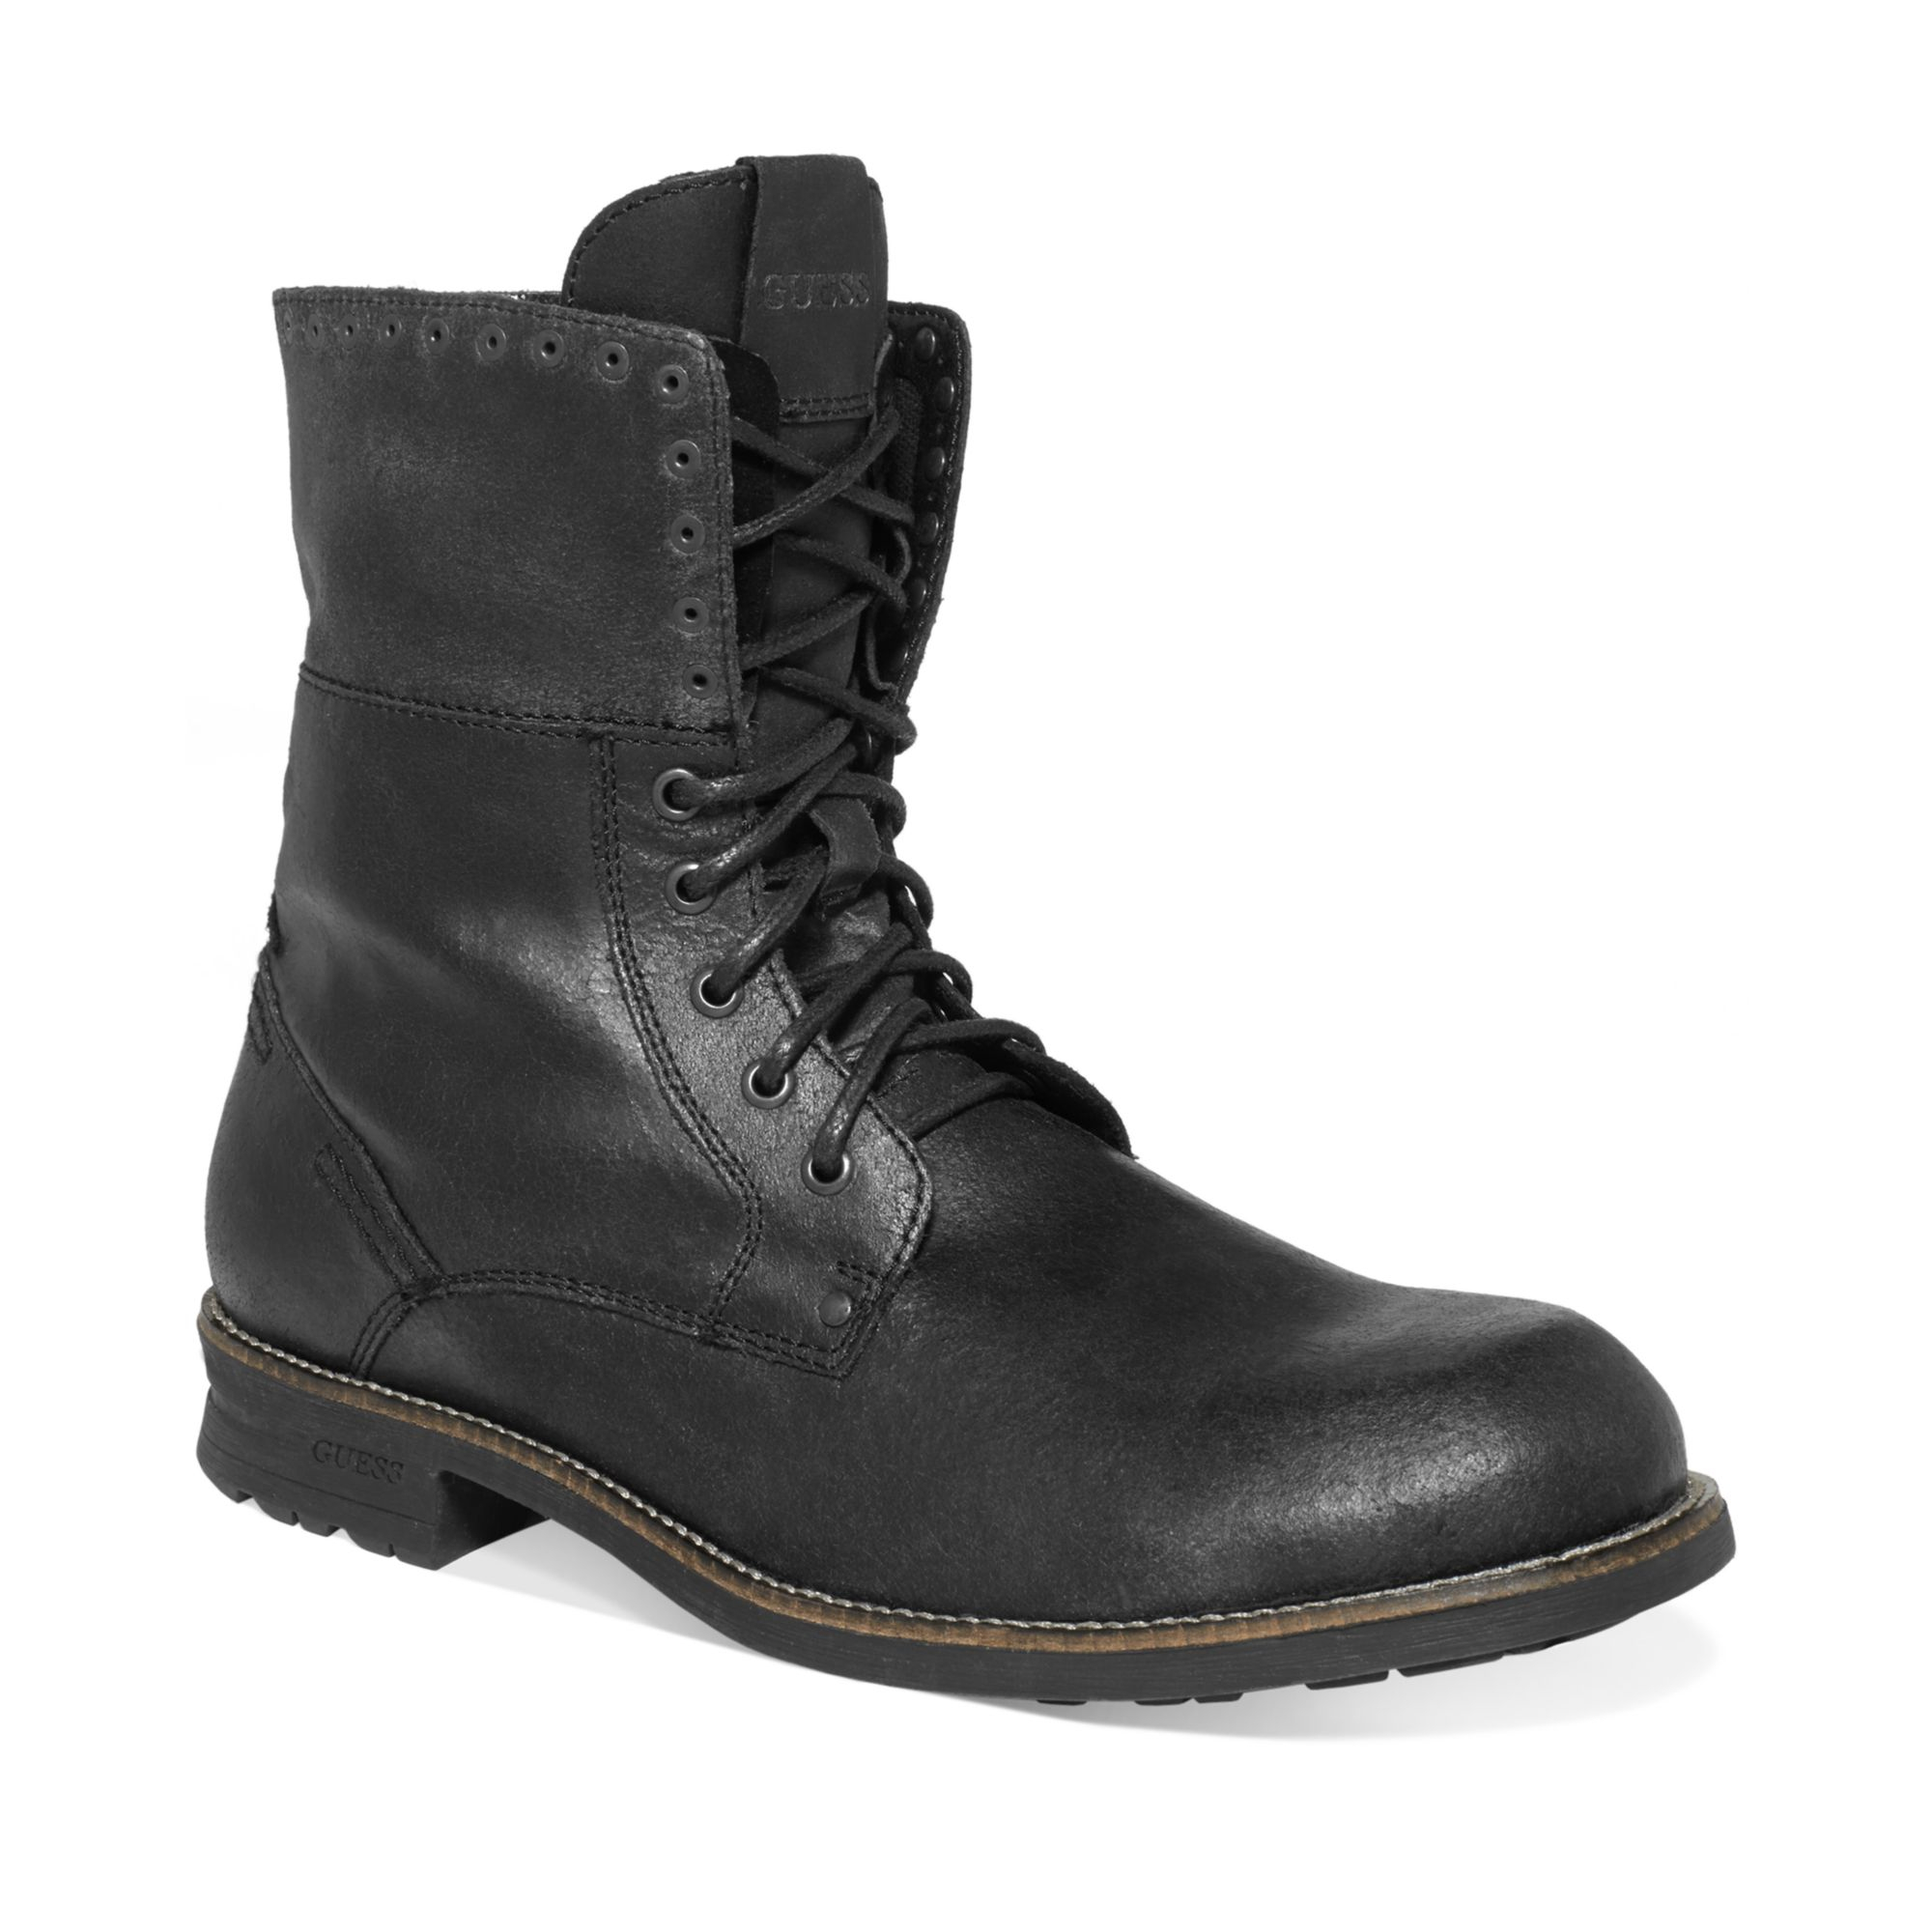 Guess Mens Shoes Differ Boots in Black for Men - Lyst